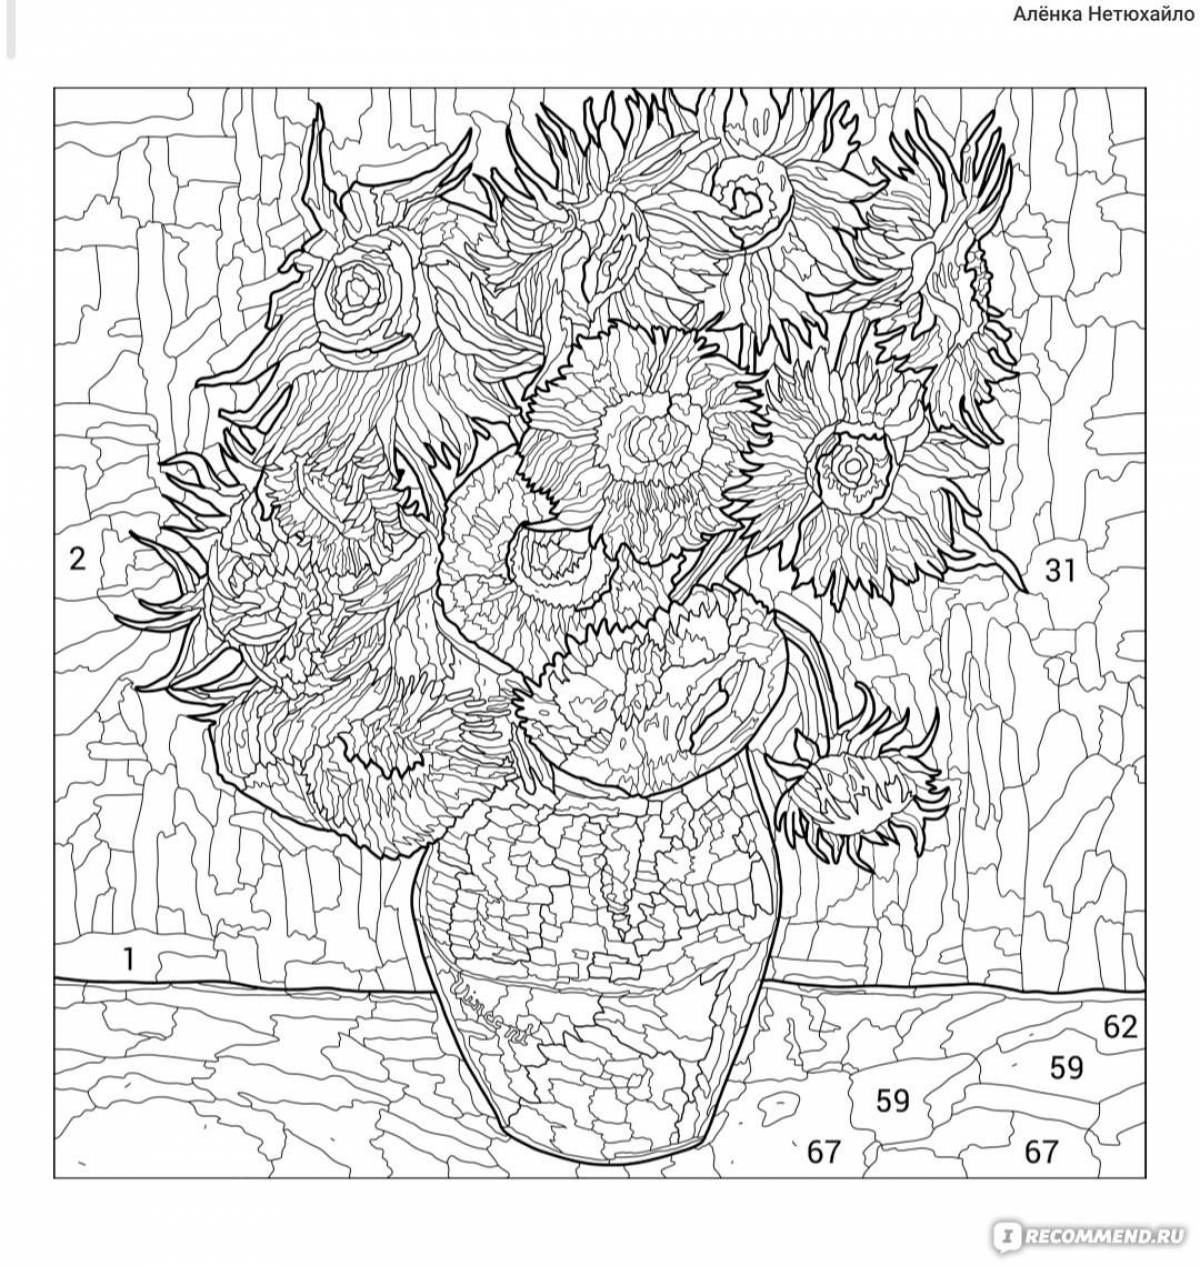 Exquisite adult coloring by numbers